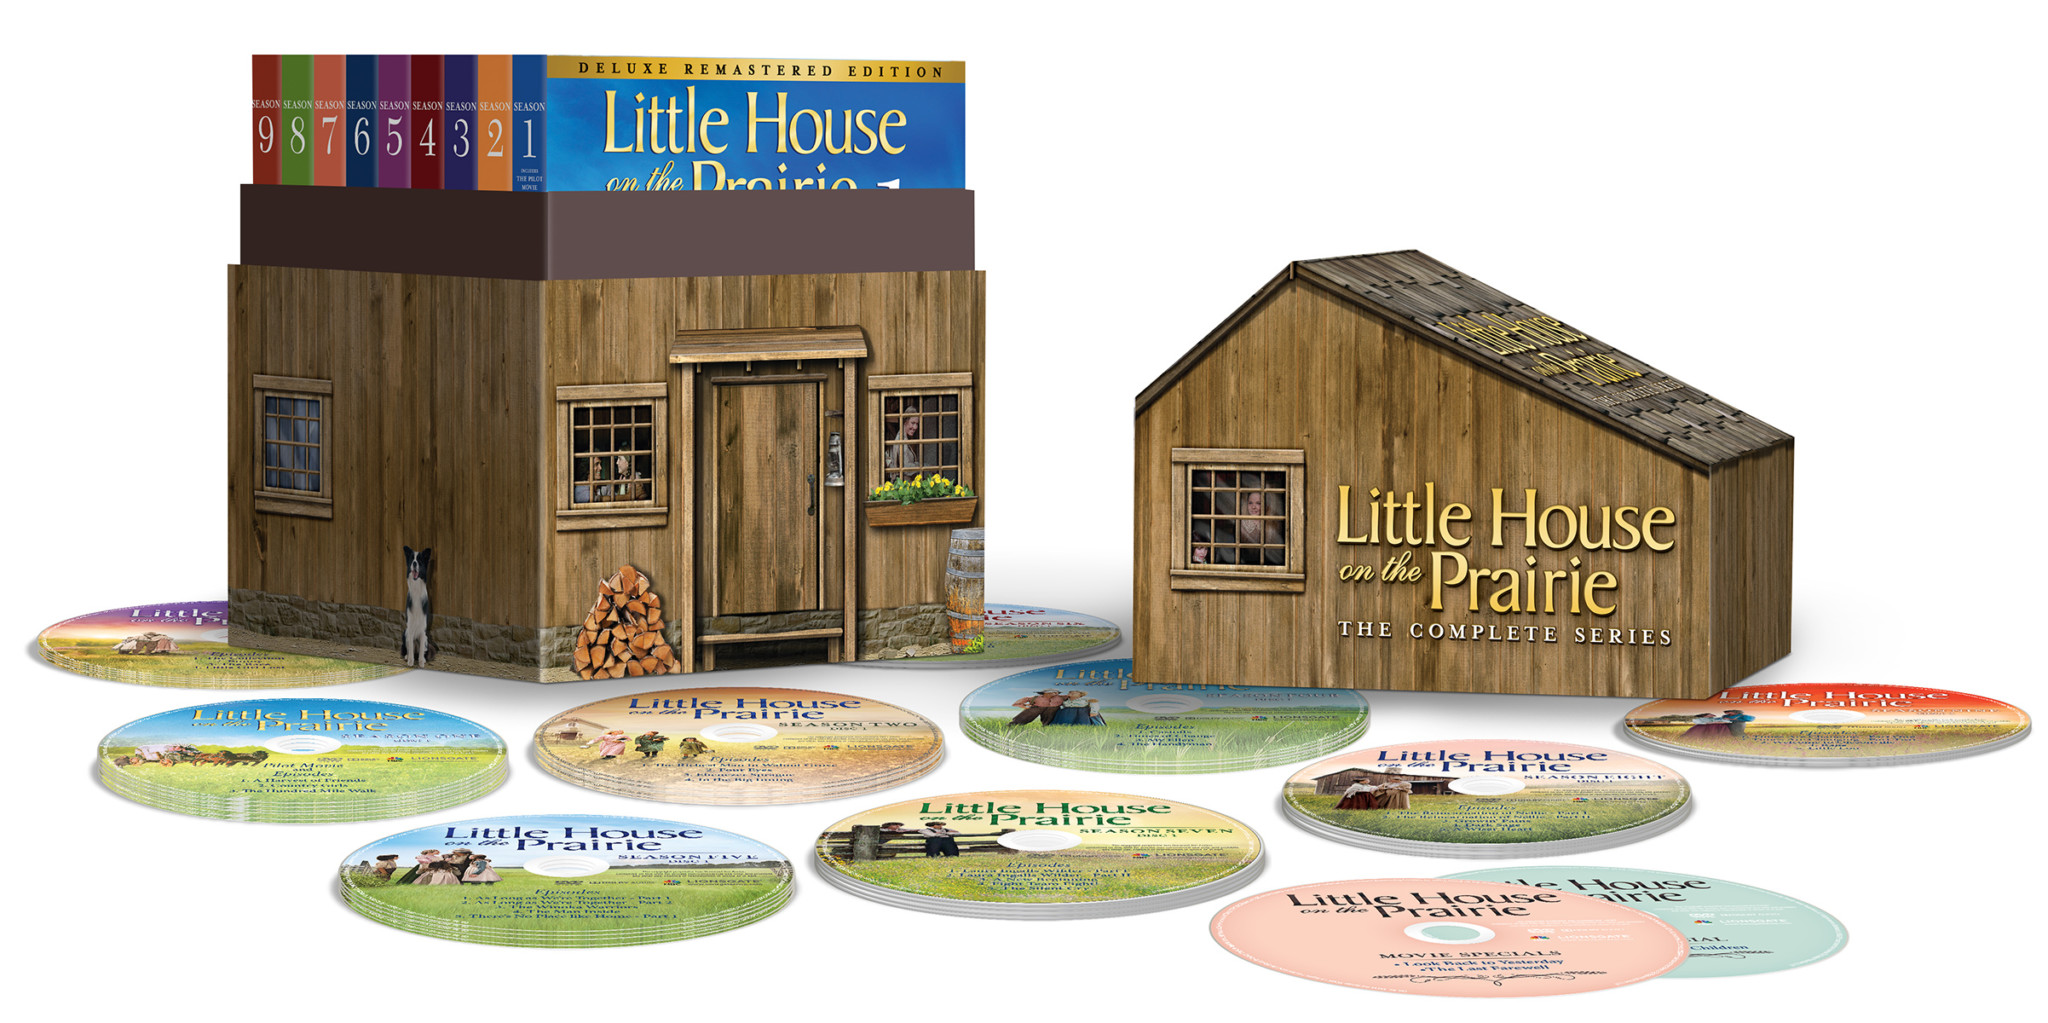 Little House on the Prairie: The Complete Series